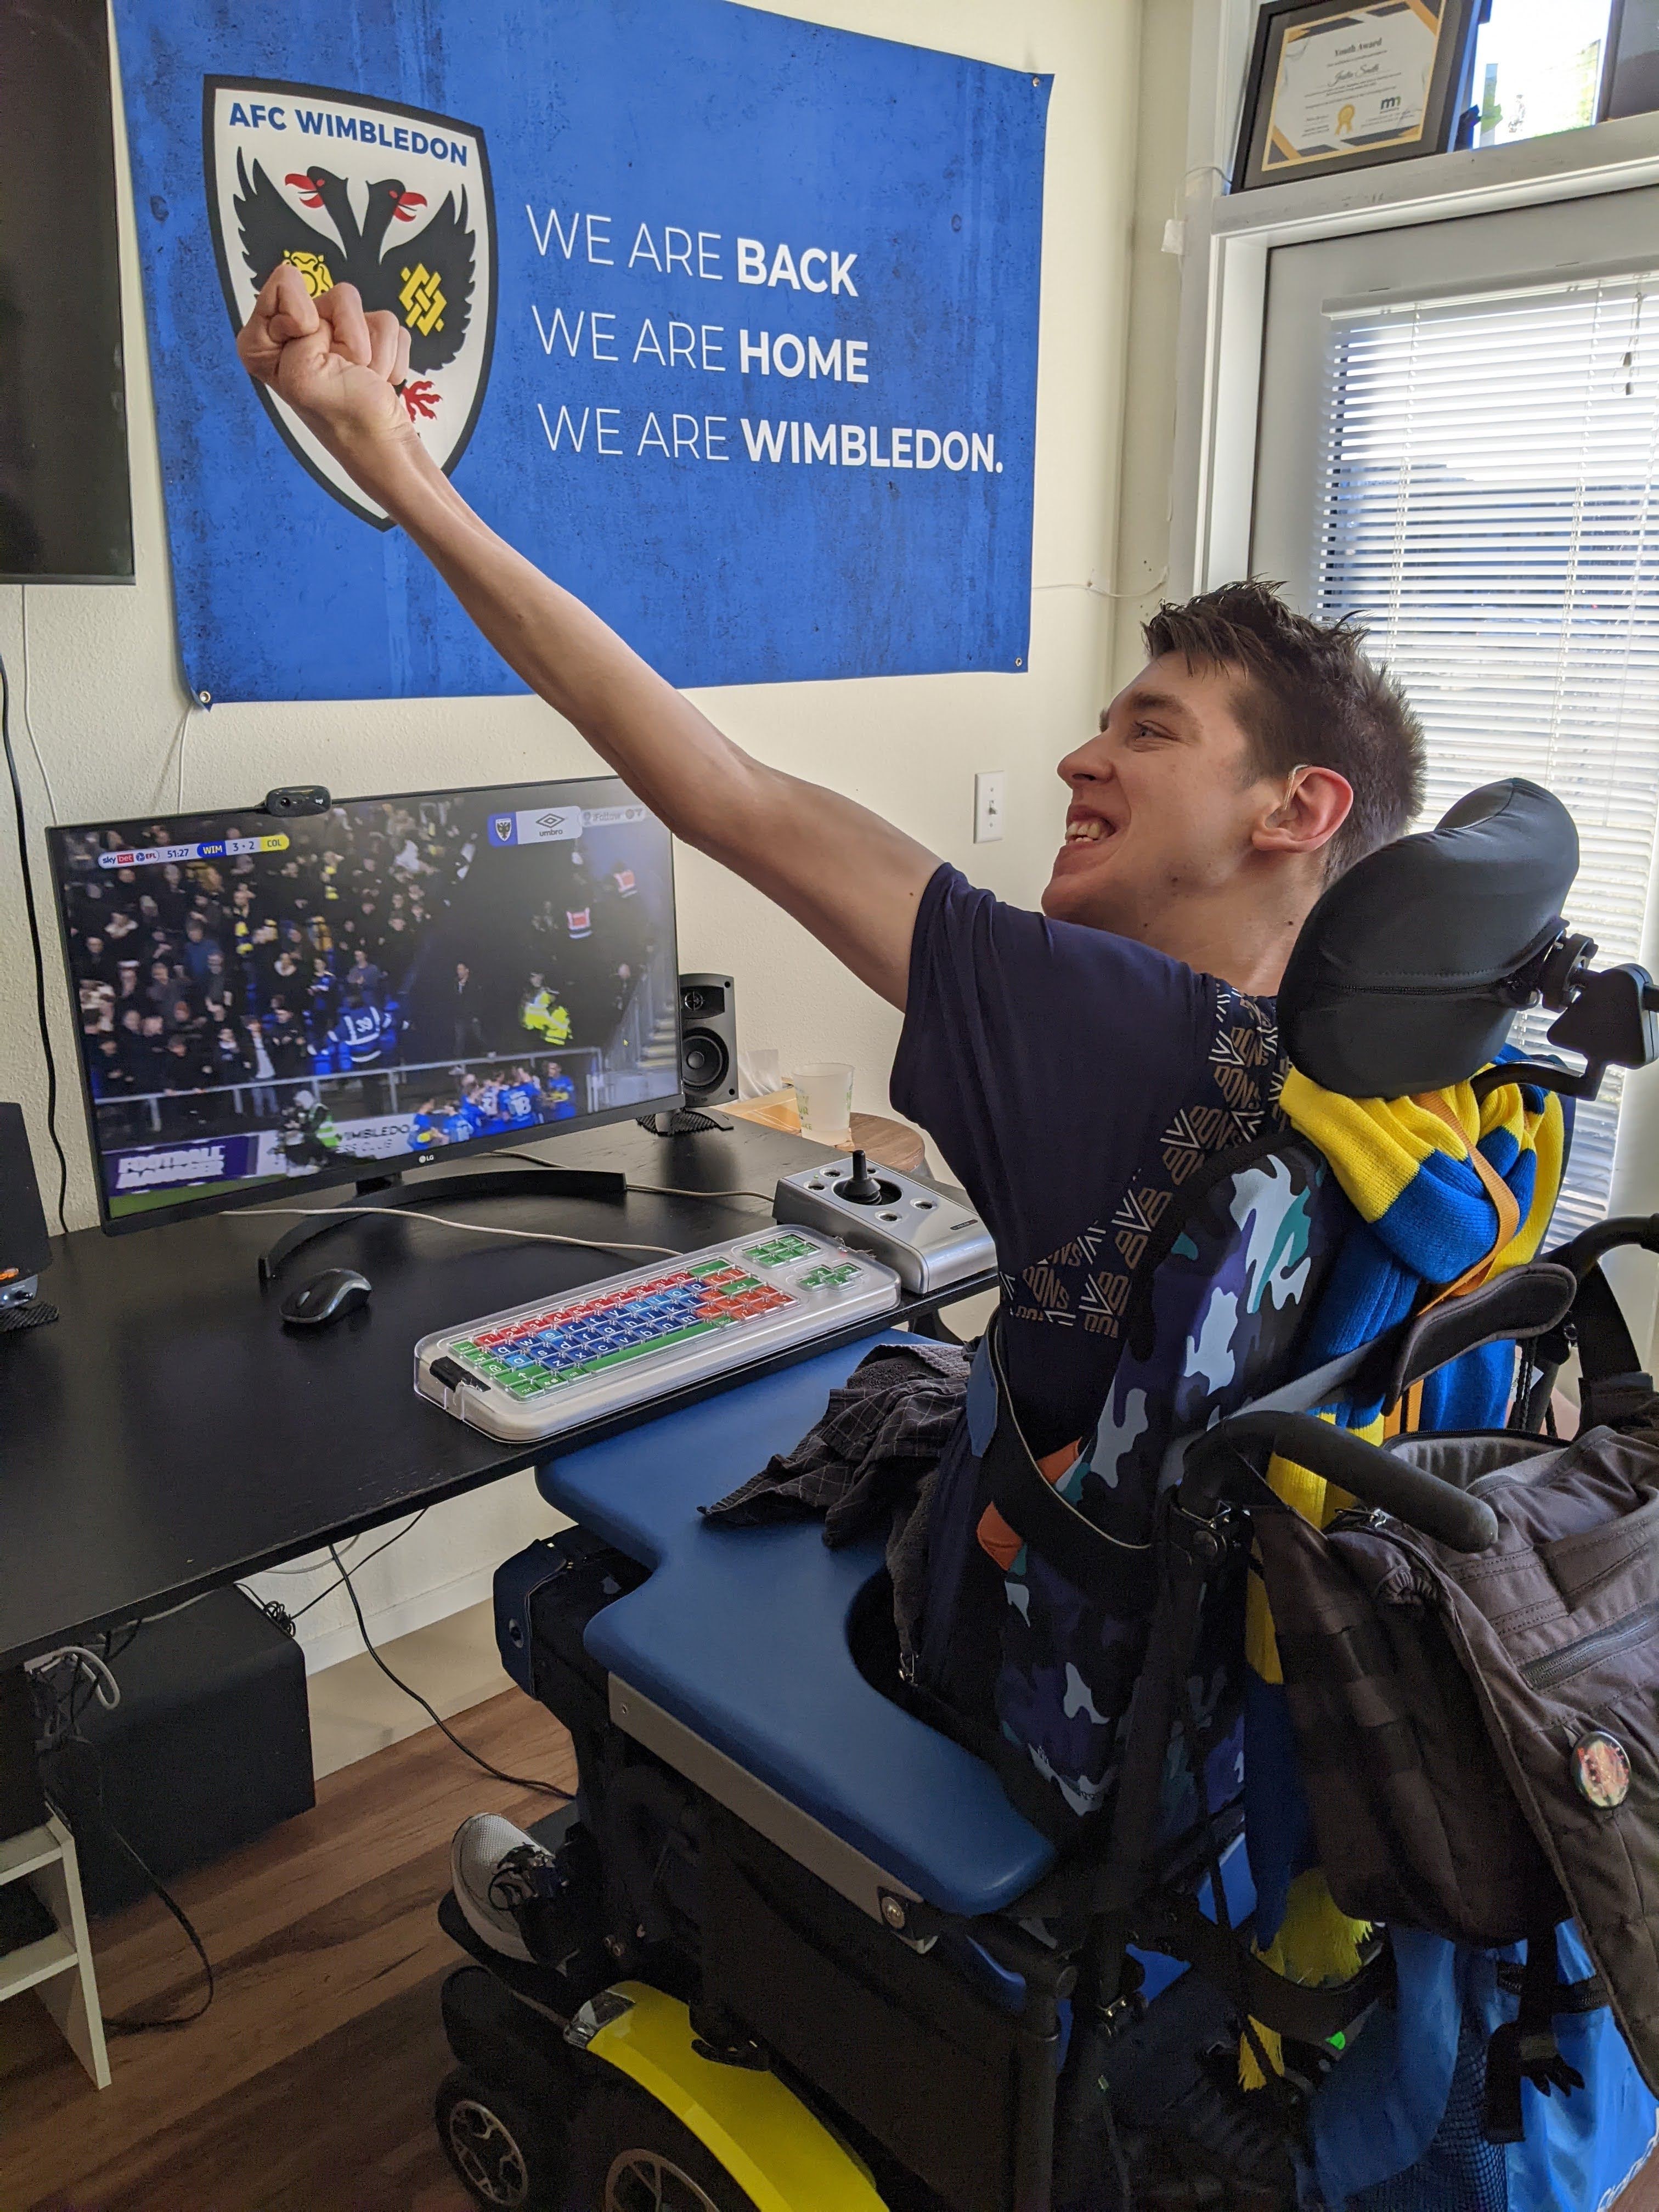 Justin, a smiling young man in his 20s holding up arm in celebratory cheer as he watches soccer on computer, sitting in blue and yellow power wheelchair, blue and yellow AFC Wimbledon scarf wrapped around headrest, there is an AFC Wimbledon flag hanging on the wall.